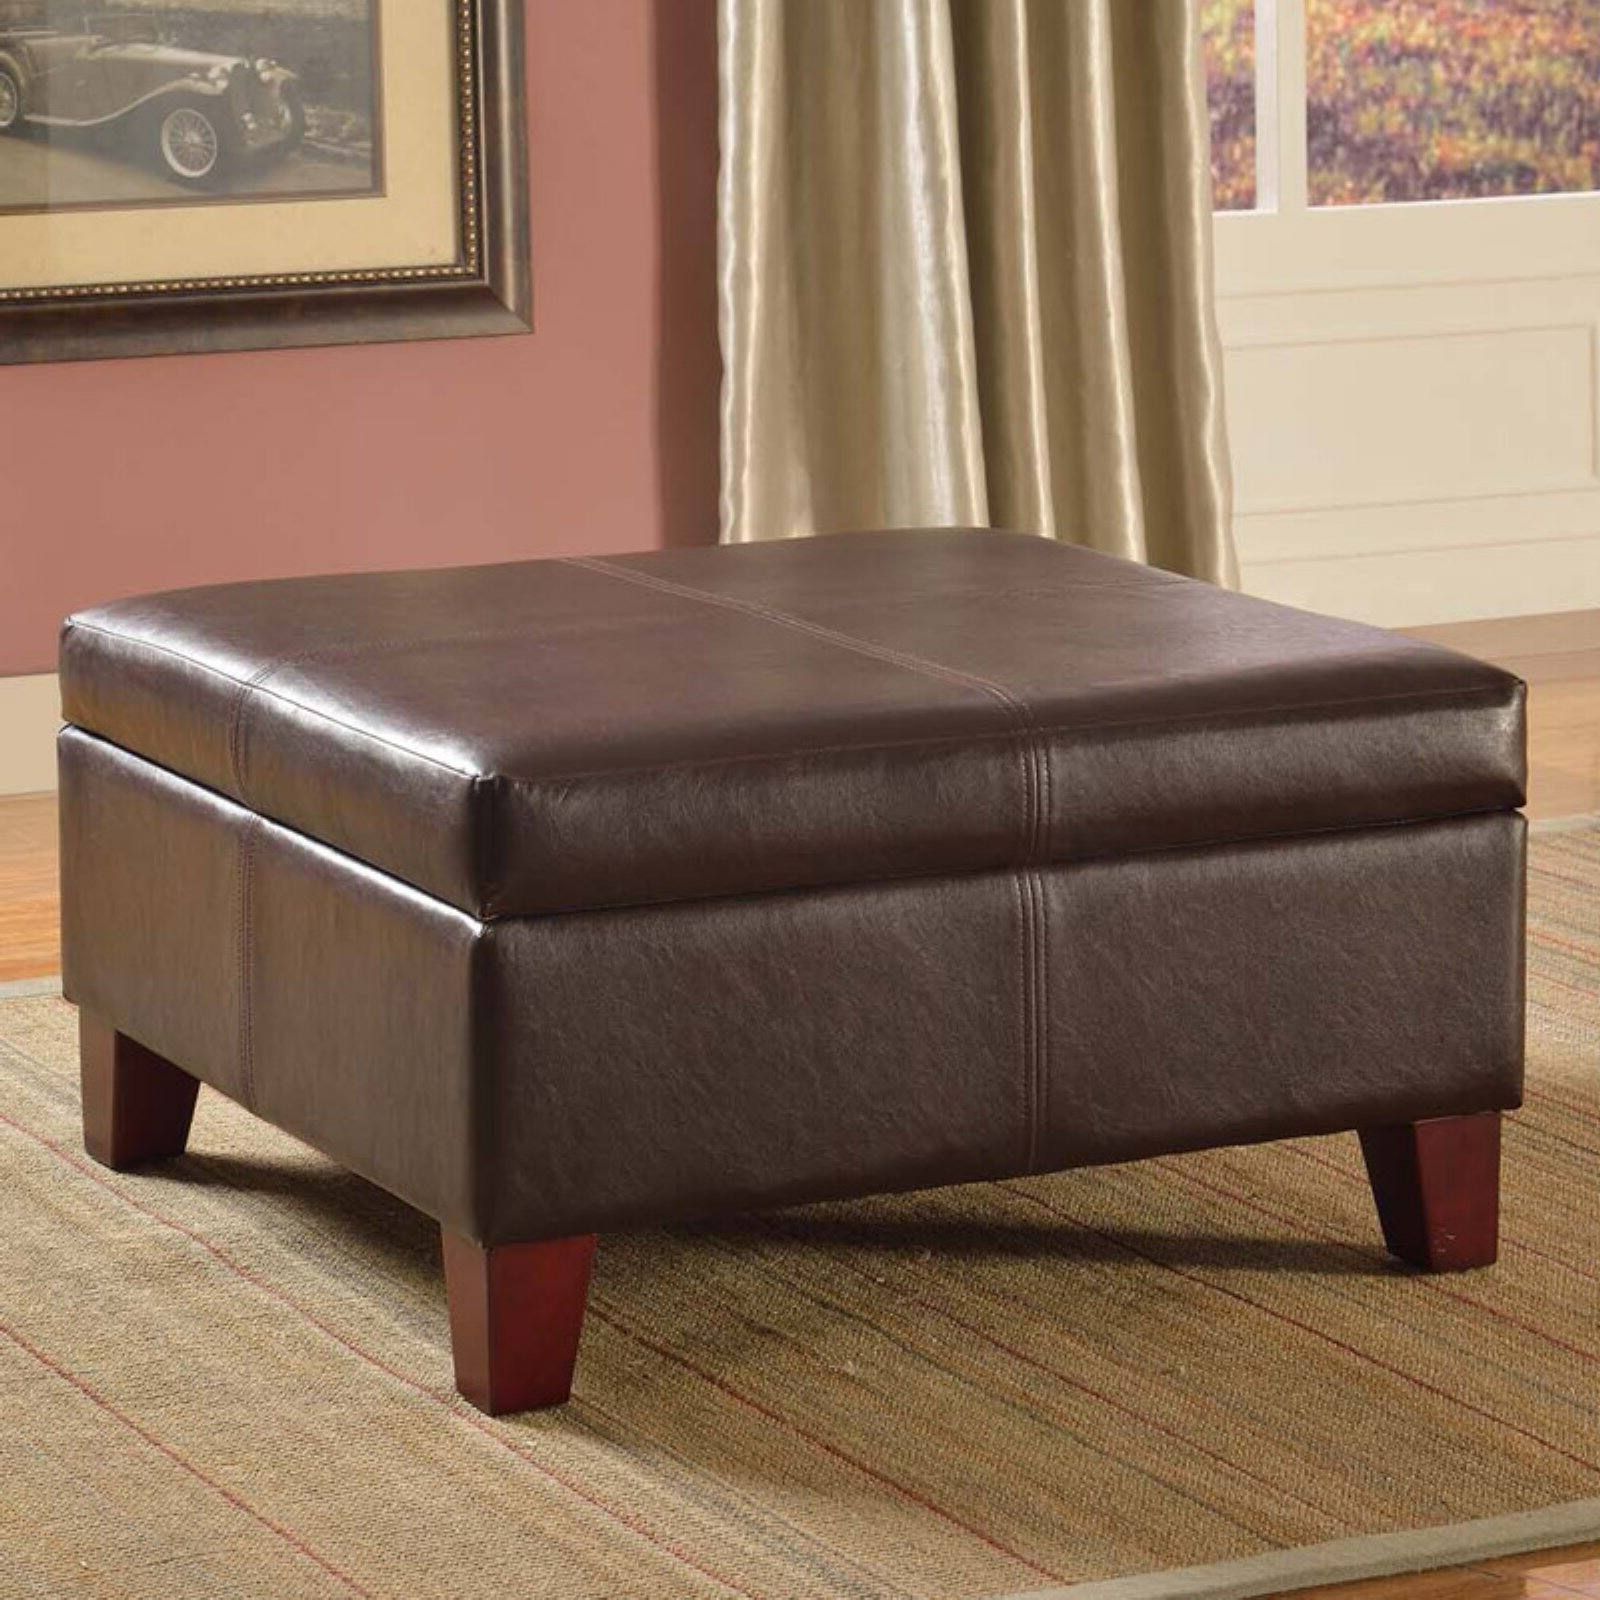 Kinfine Usa Luxury Large Faux Leather Storage Ottoman – Walmart Intended For Preferred Fabric Oversized Pouf Ottomans (View 2 of 10)